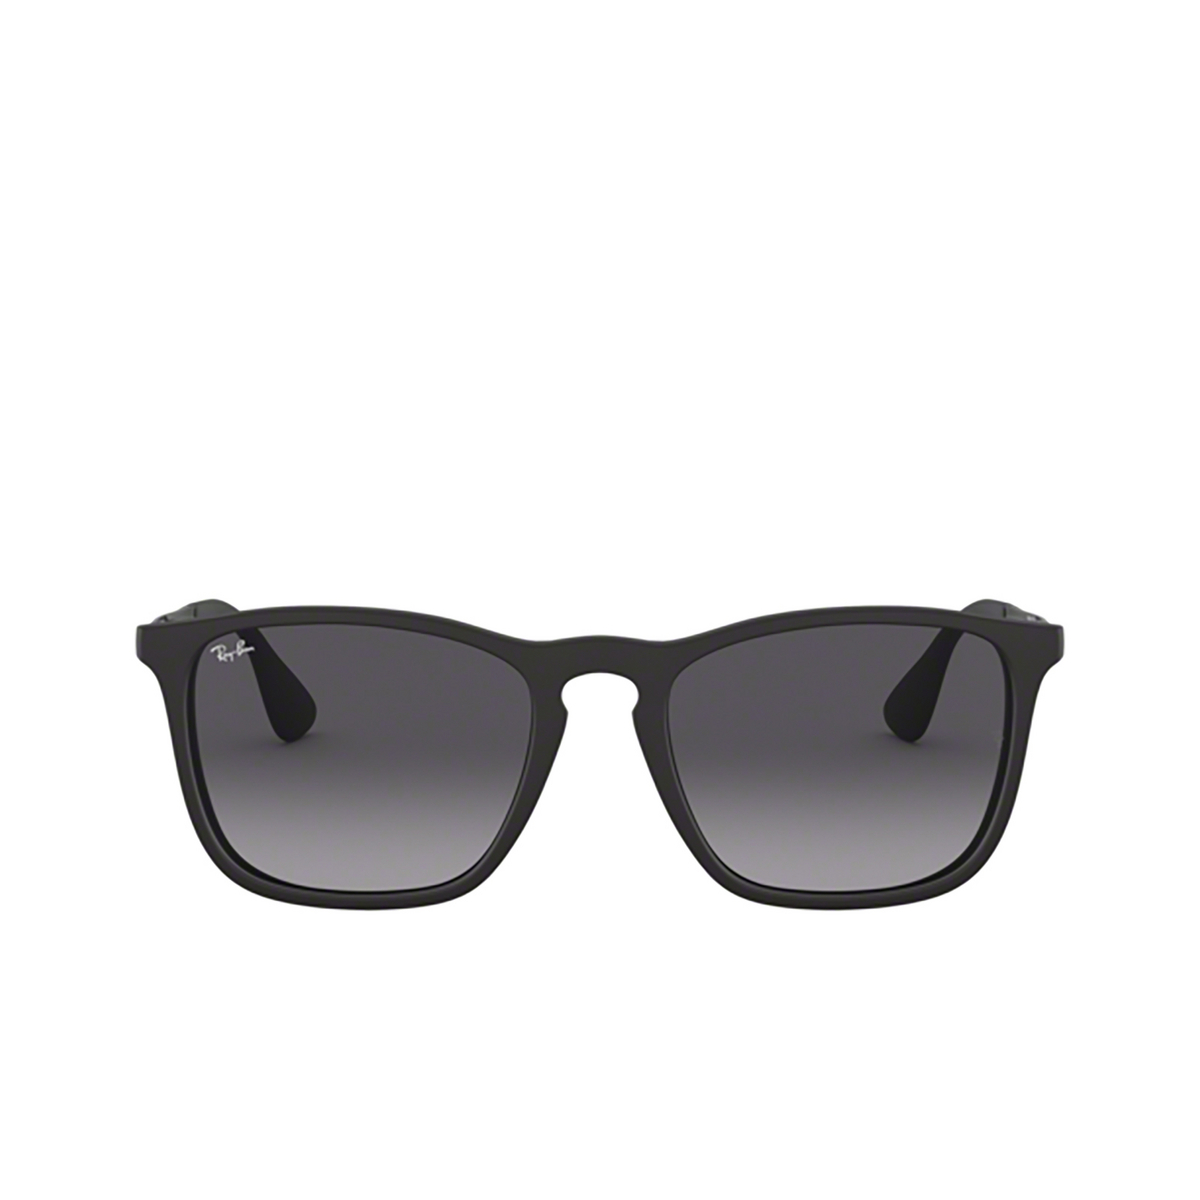 Ray-Ban® Square Sunglasses: RB4187 Chris color 622/8G Rubber Black - 1/3